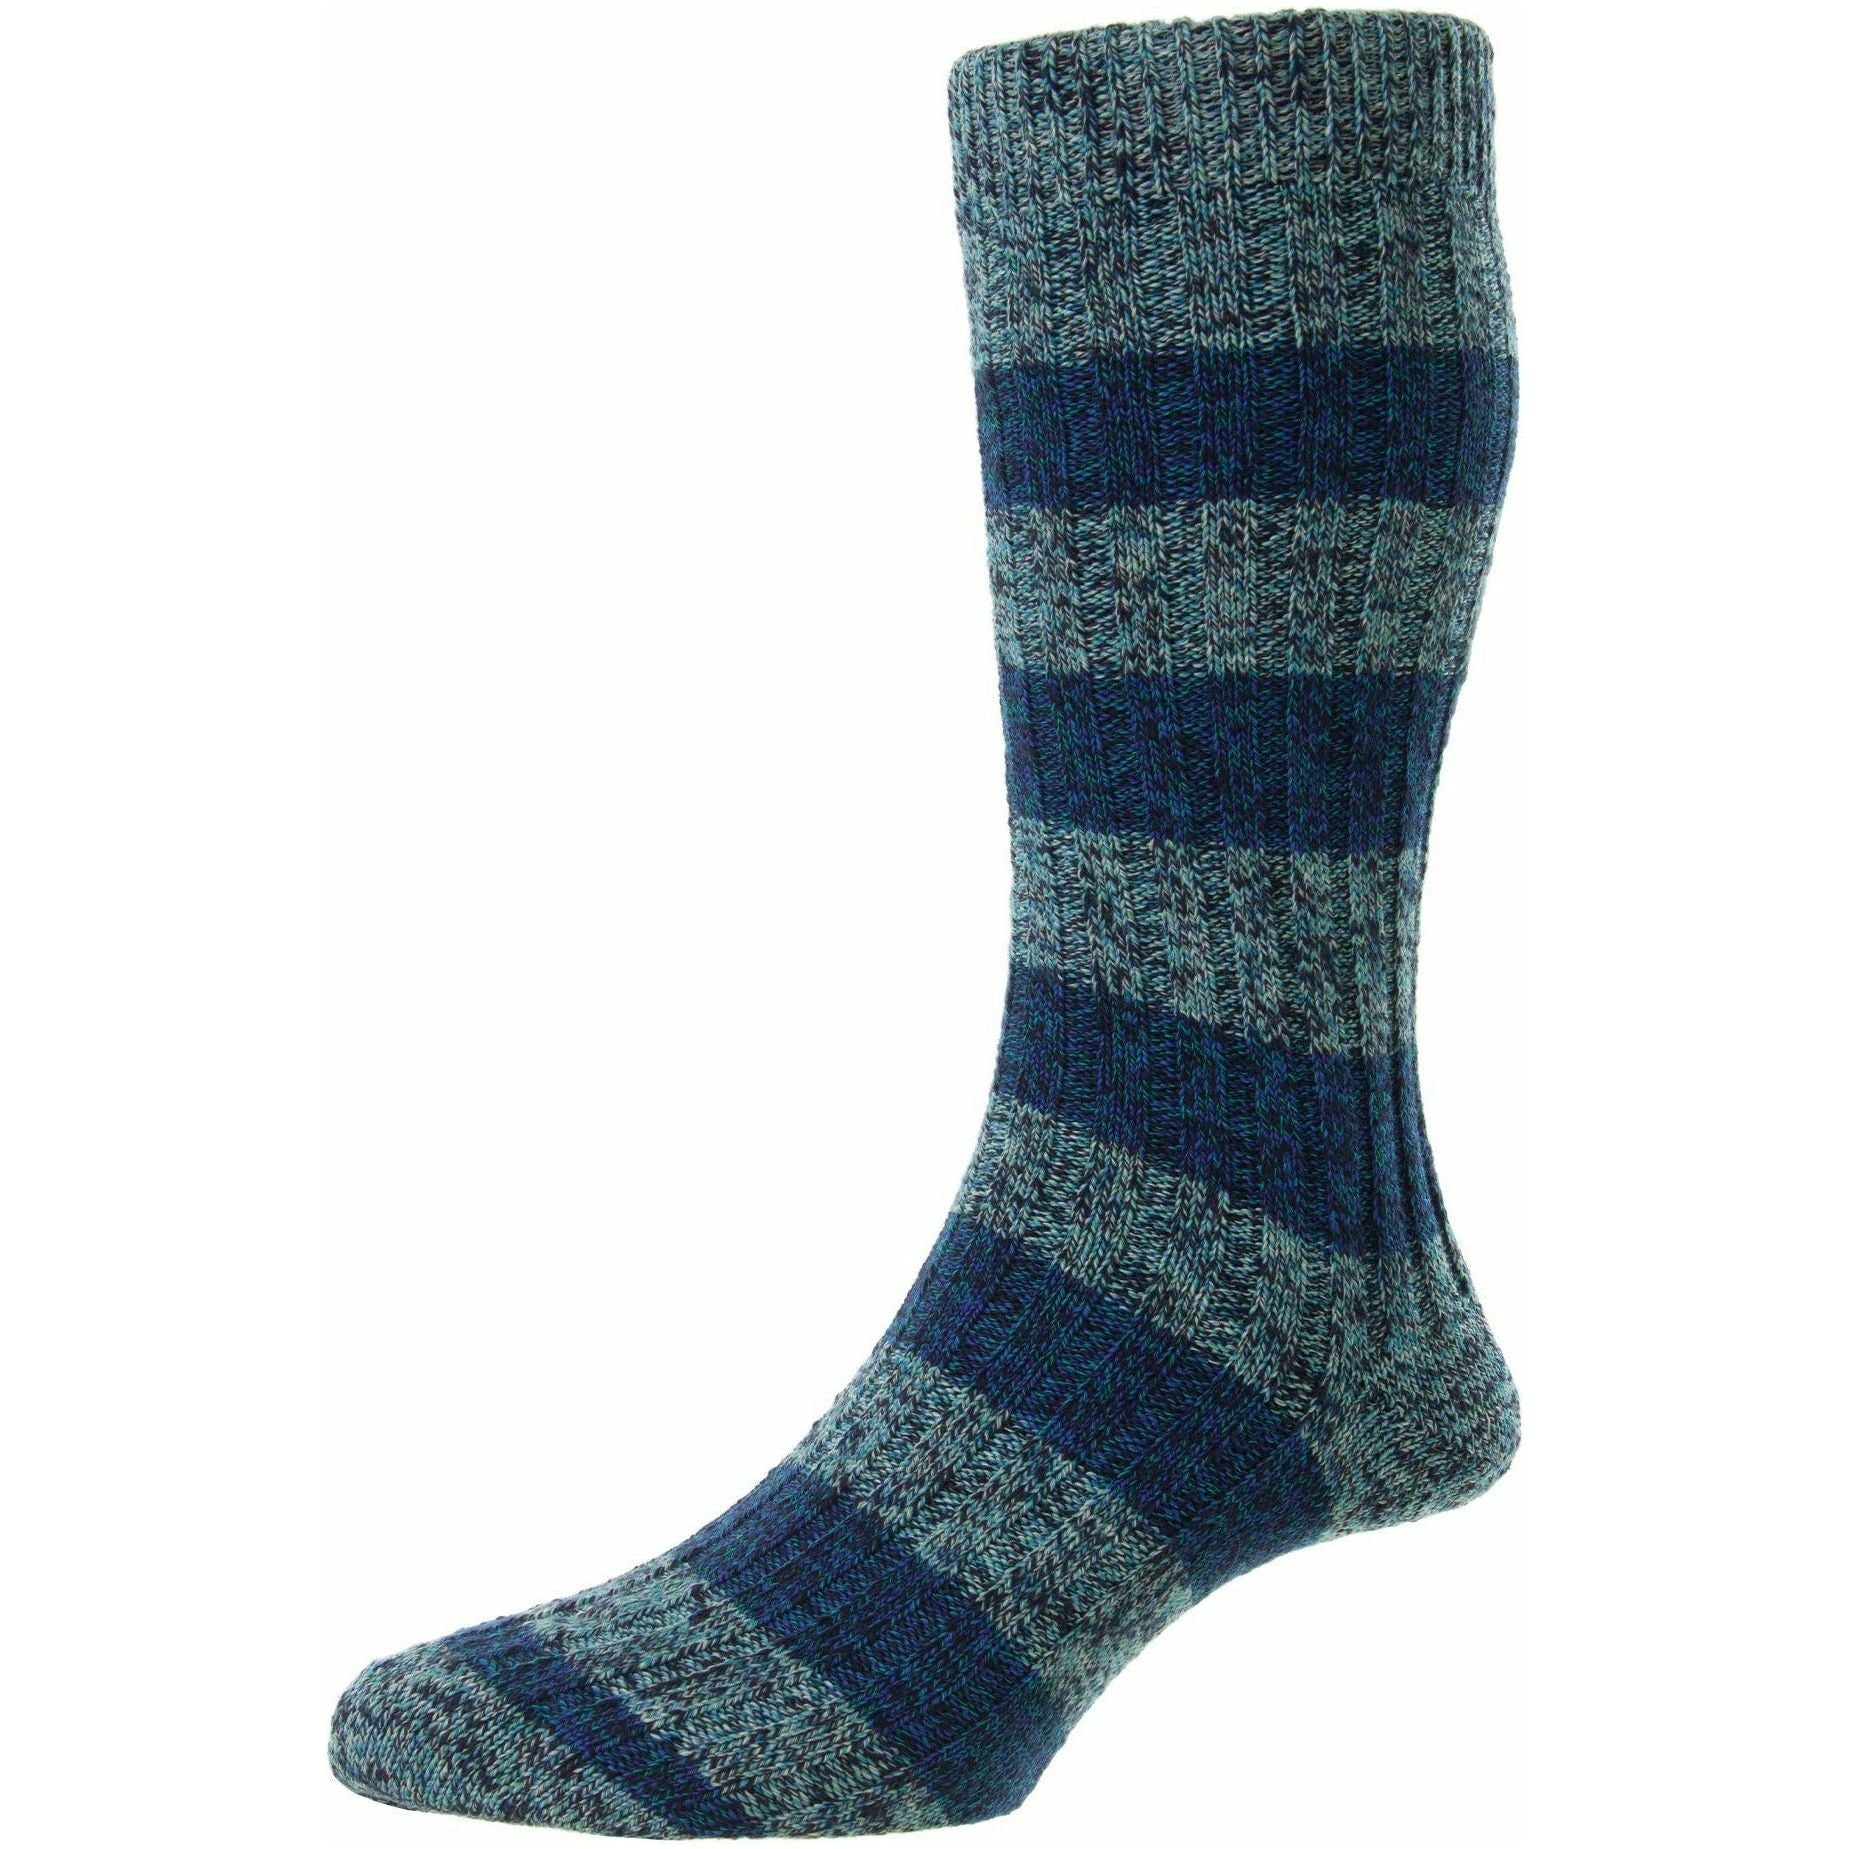 Rockley Recycled Cotton Mid-Calf Dress Socks